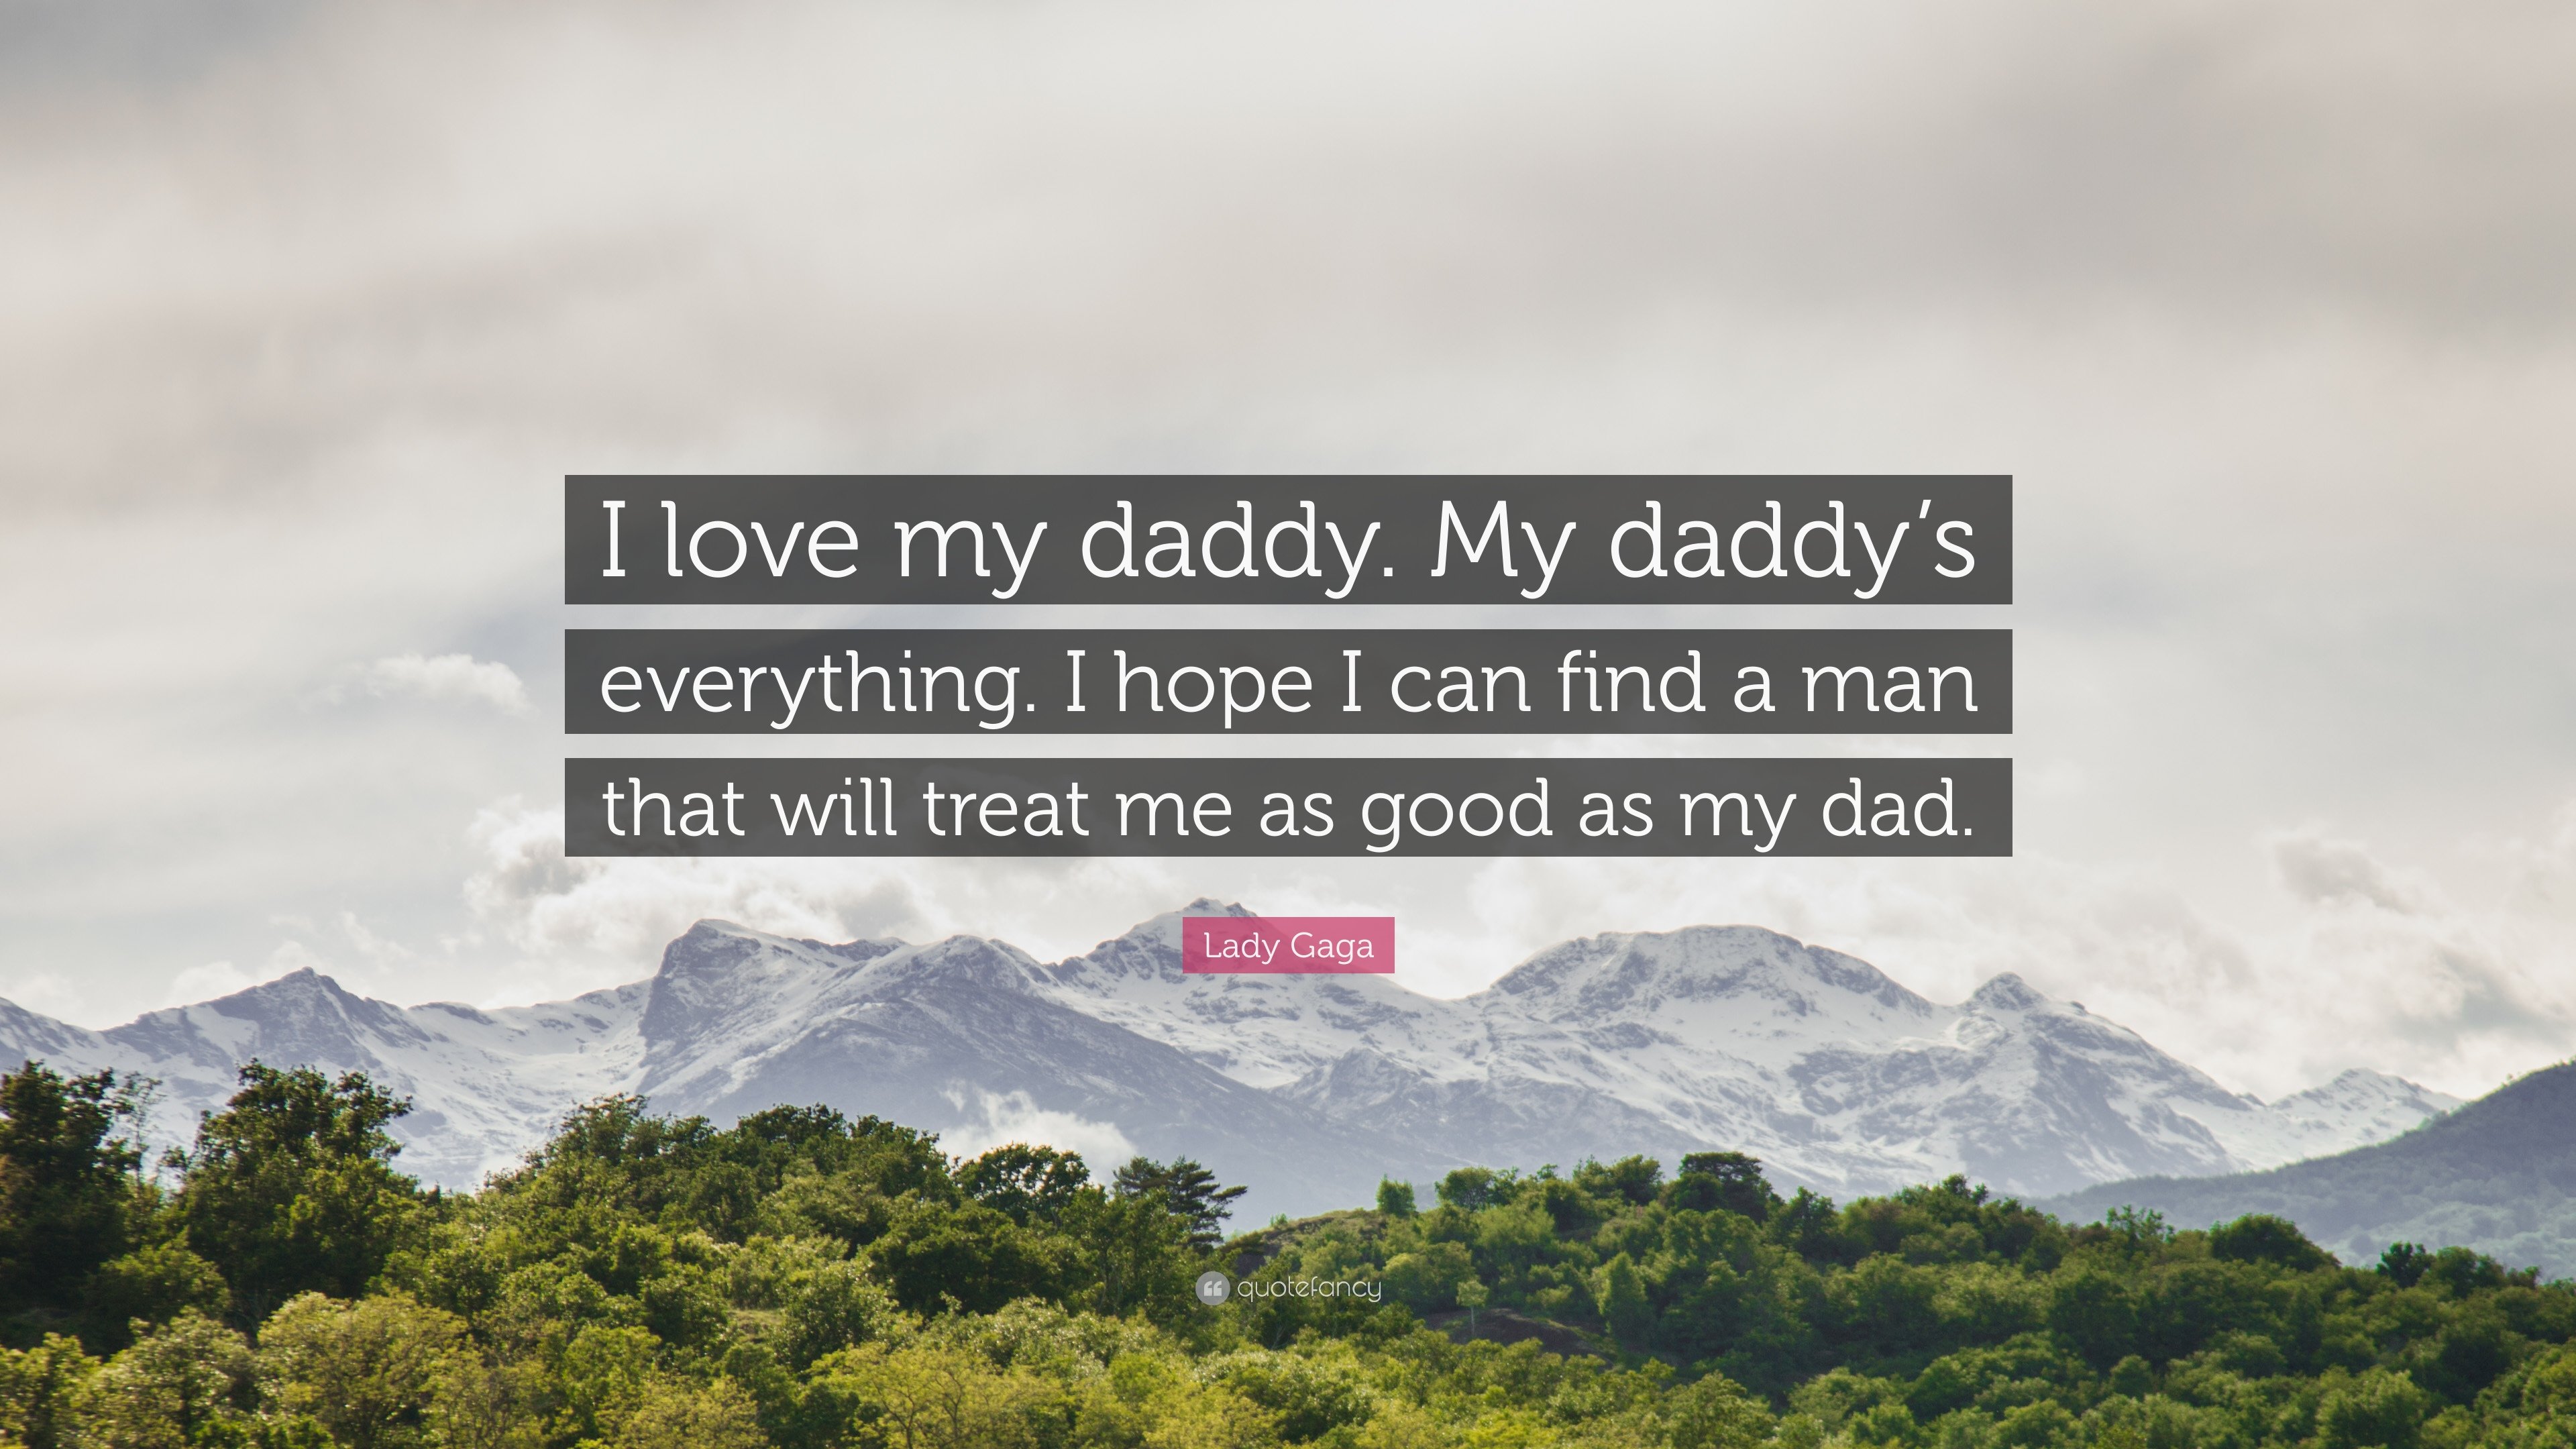 Lady Gaga Quote: “I love my daddy. My daddy's everything. I hope I